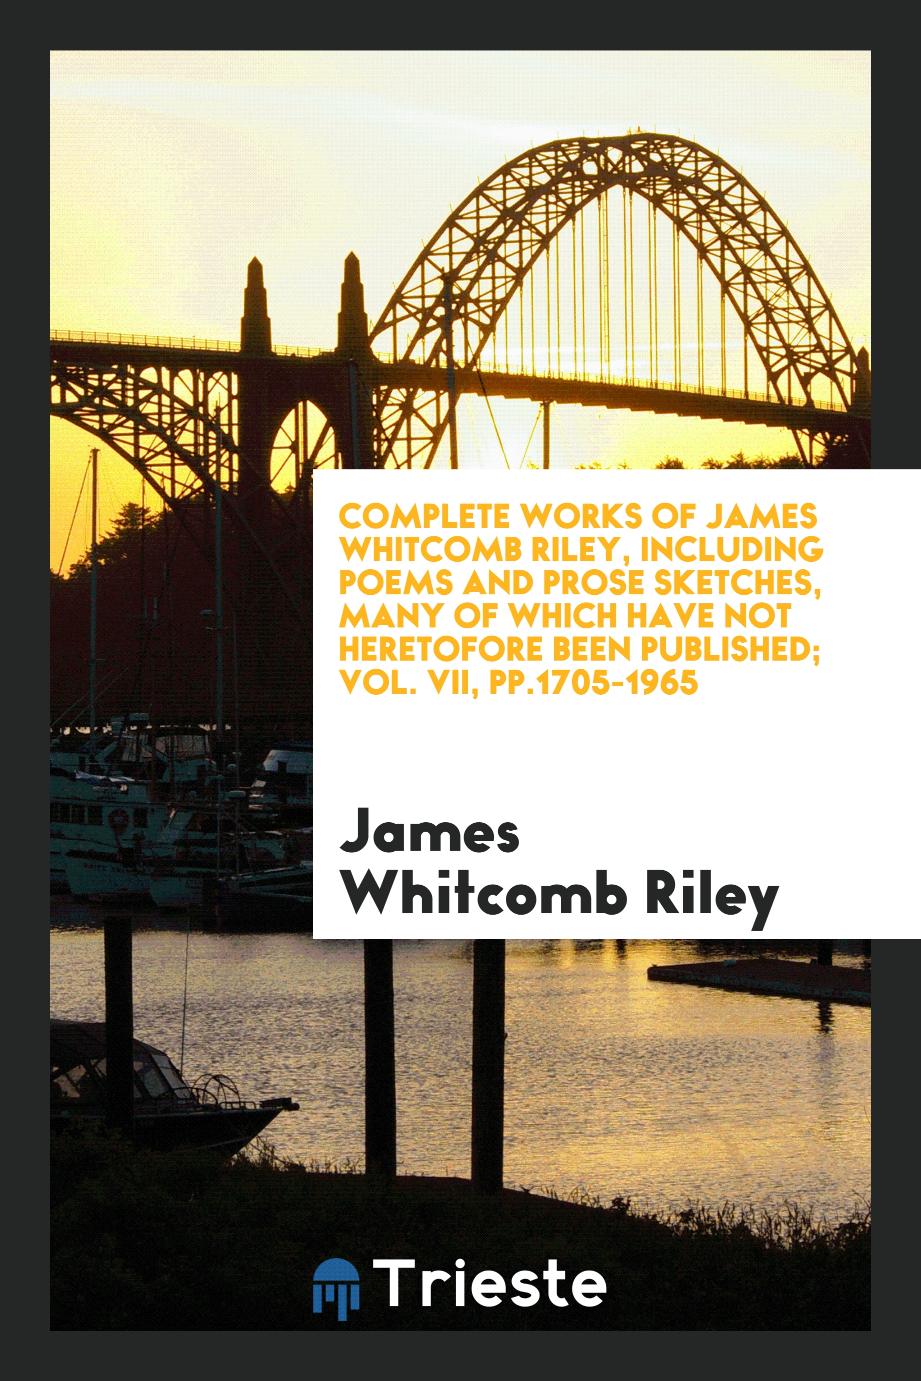 Complete works of James Whitcomb Riley, including poems and prose sketches, many of which have not heretofore been published; Vol. VII, pp.1705-1965